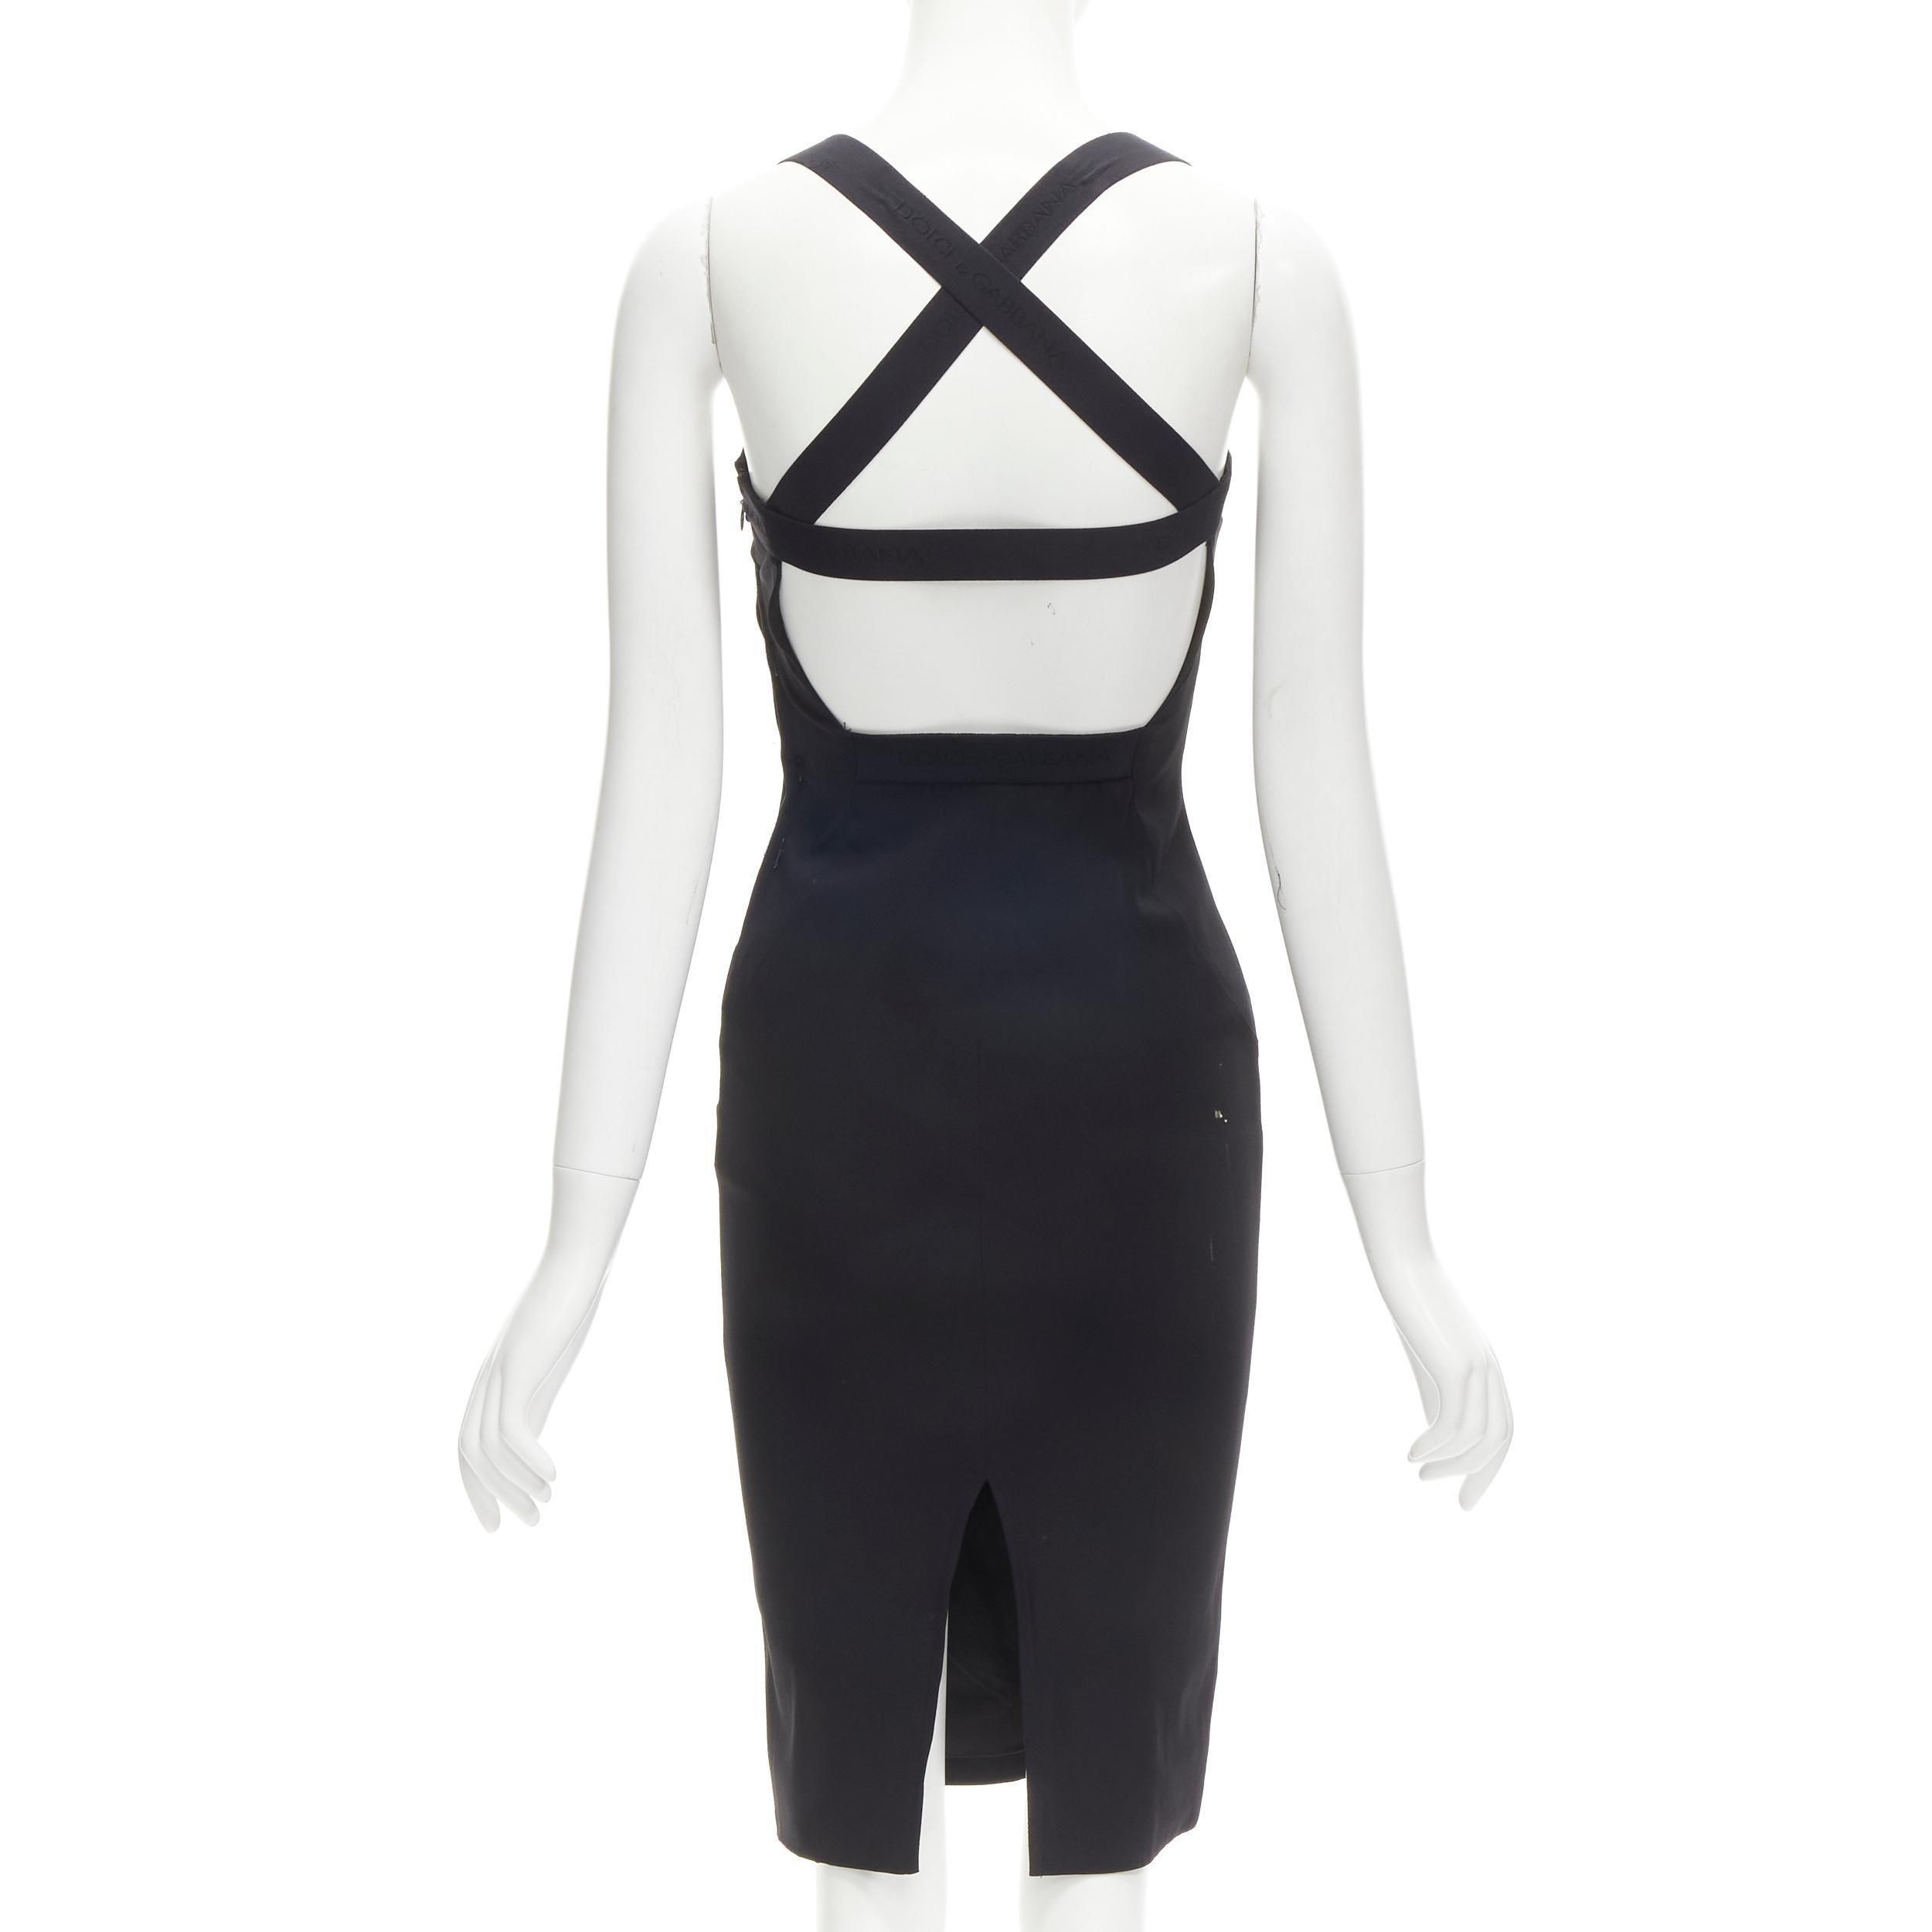 DOLCE GABBANA black logo elastic strap cross back bodycon dress IT36 XS
Brand: Dolce Gabbana
Extra Detail: DOLCE & GABBANA logo intarsia elastic shoulder straps. Padded bust. Cut out window at back. Center back vent.

CONDITION:
Condition: Very